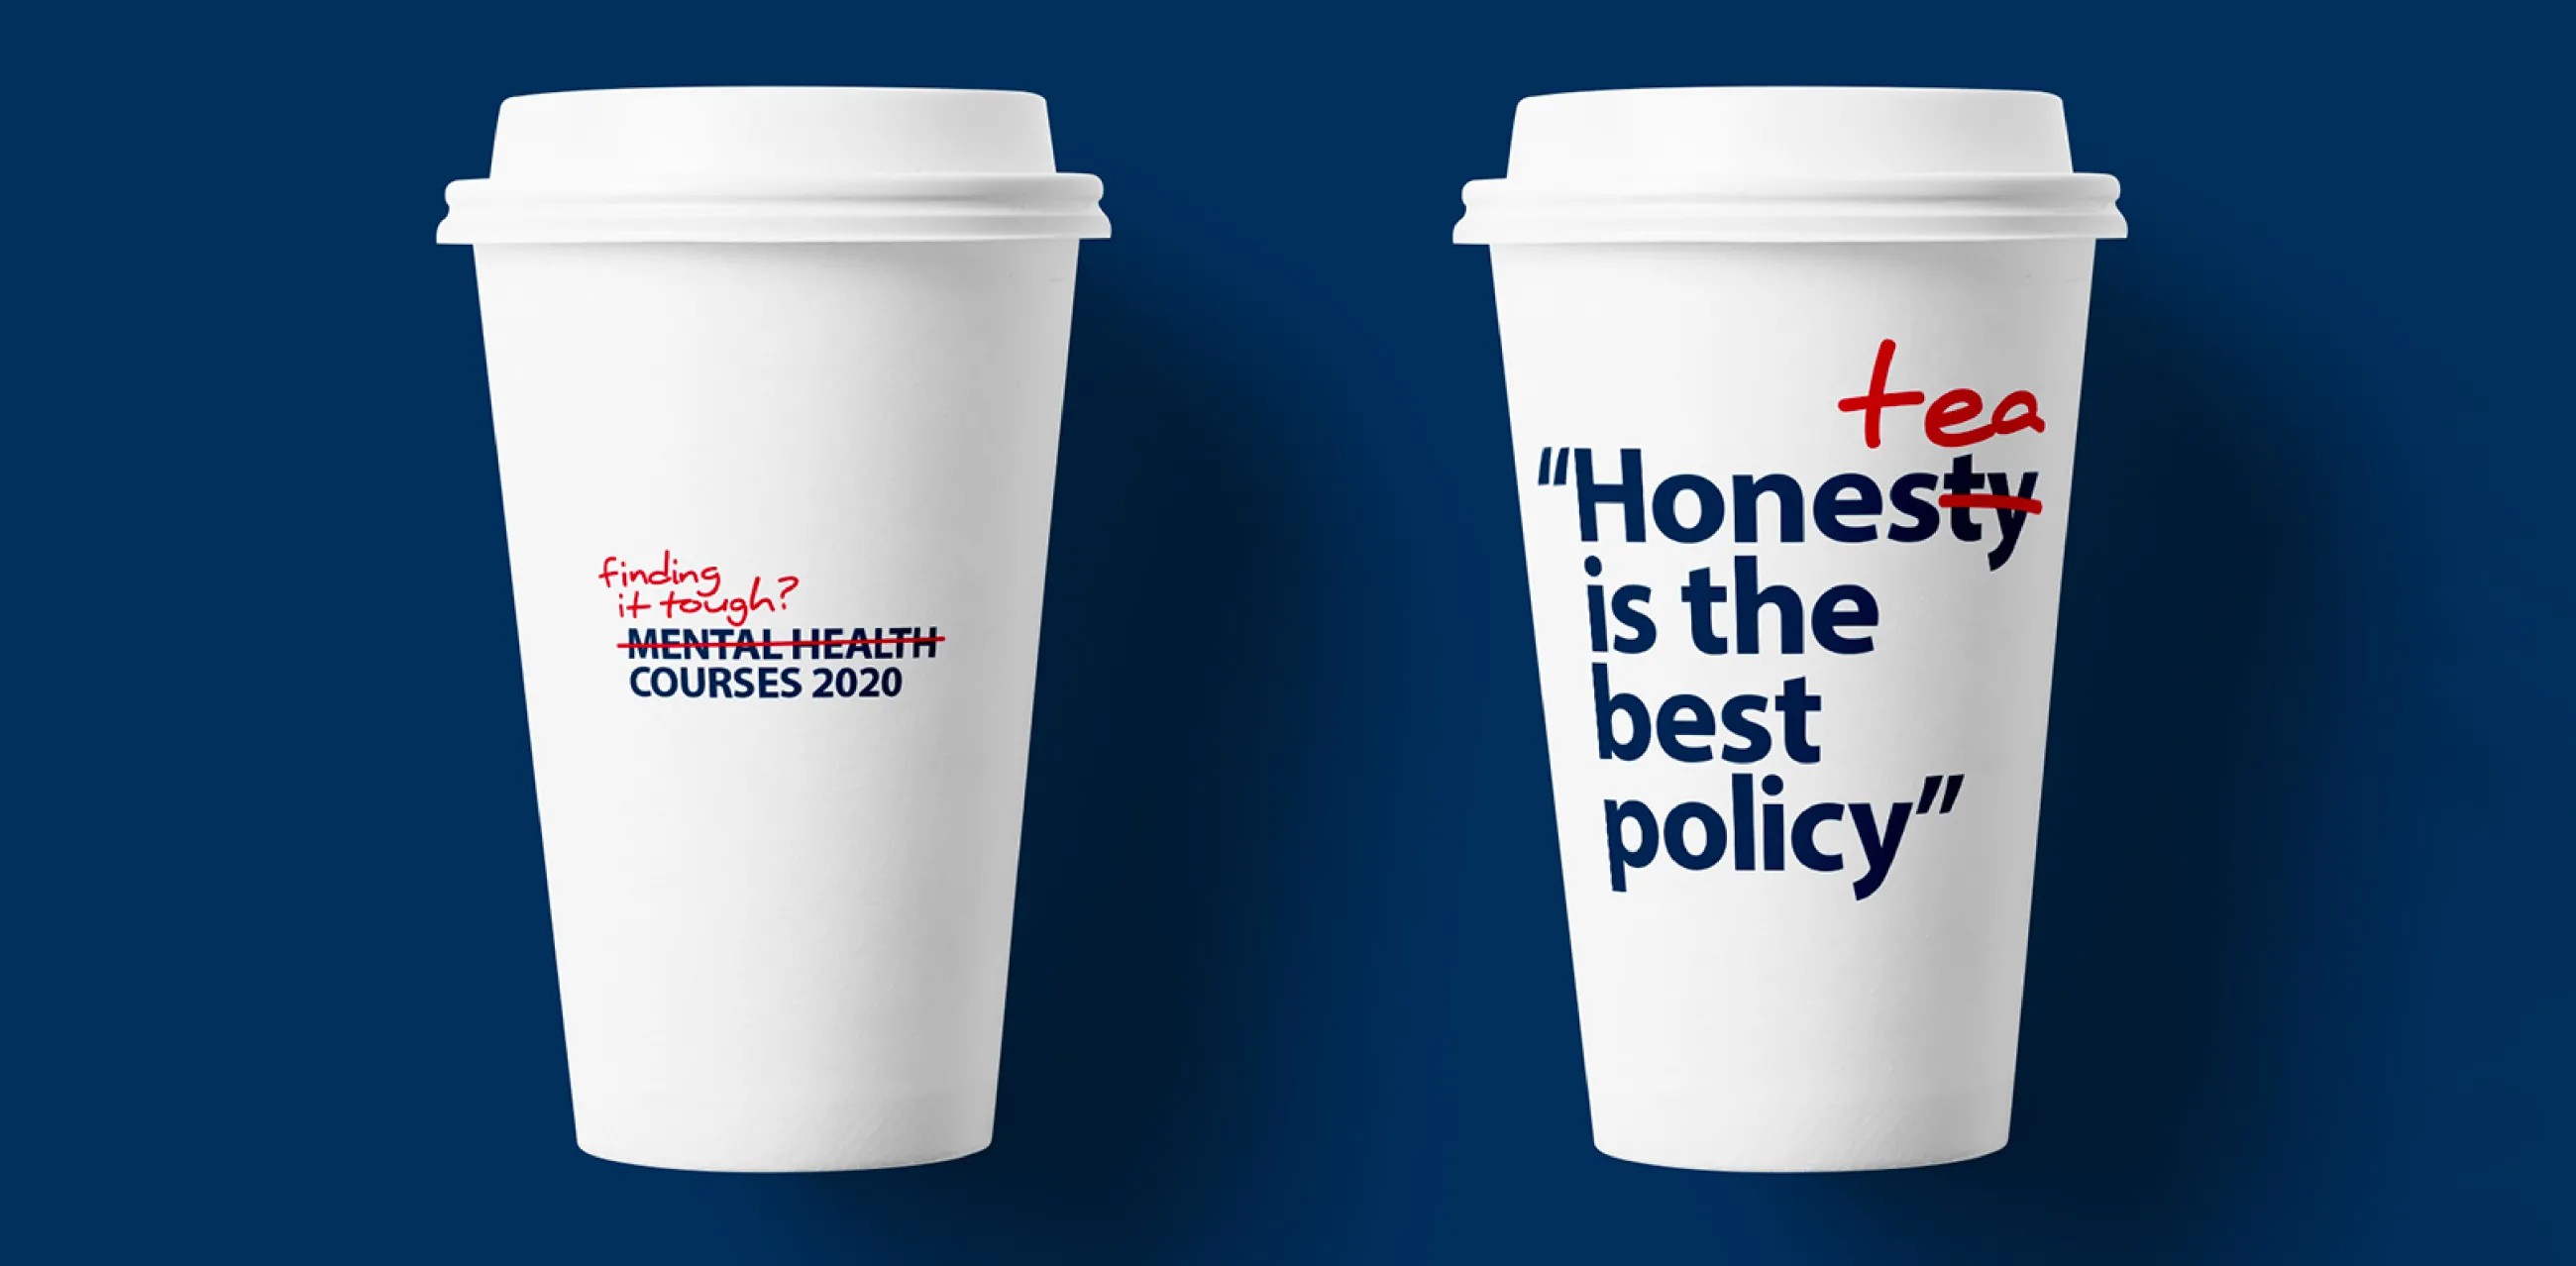 Coffee cups with Finding it Tough logo and slogan "Honesty is the best policy" changed to Honestea. 